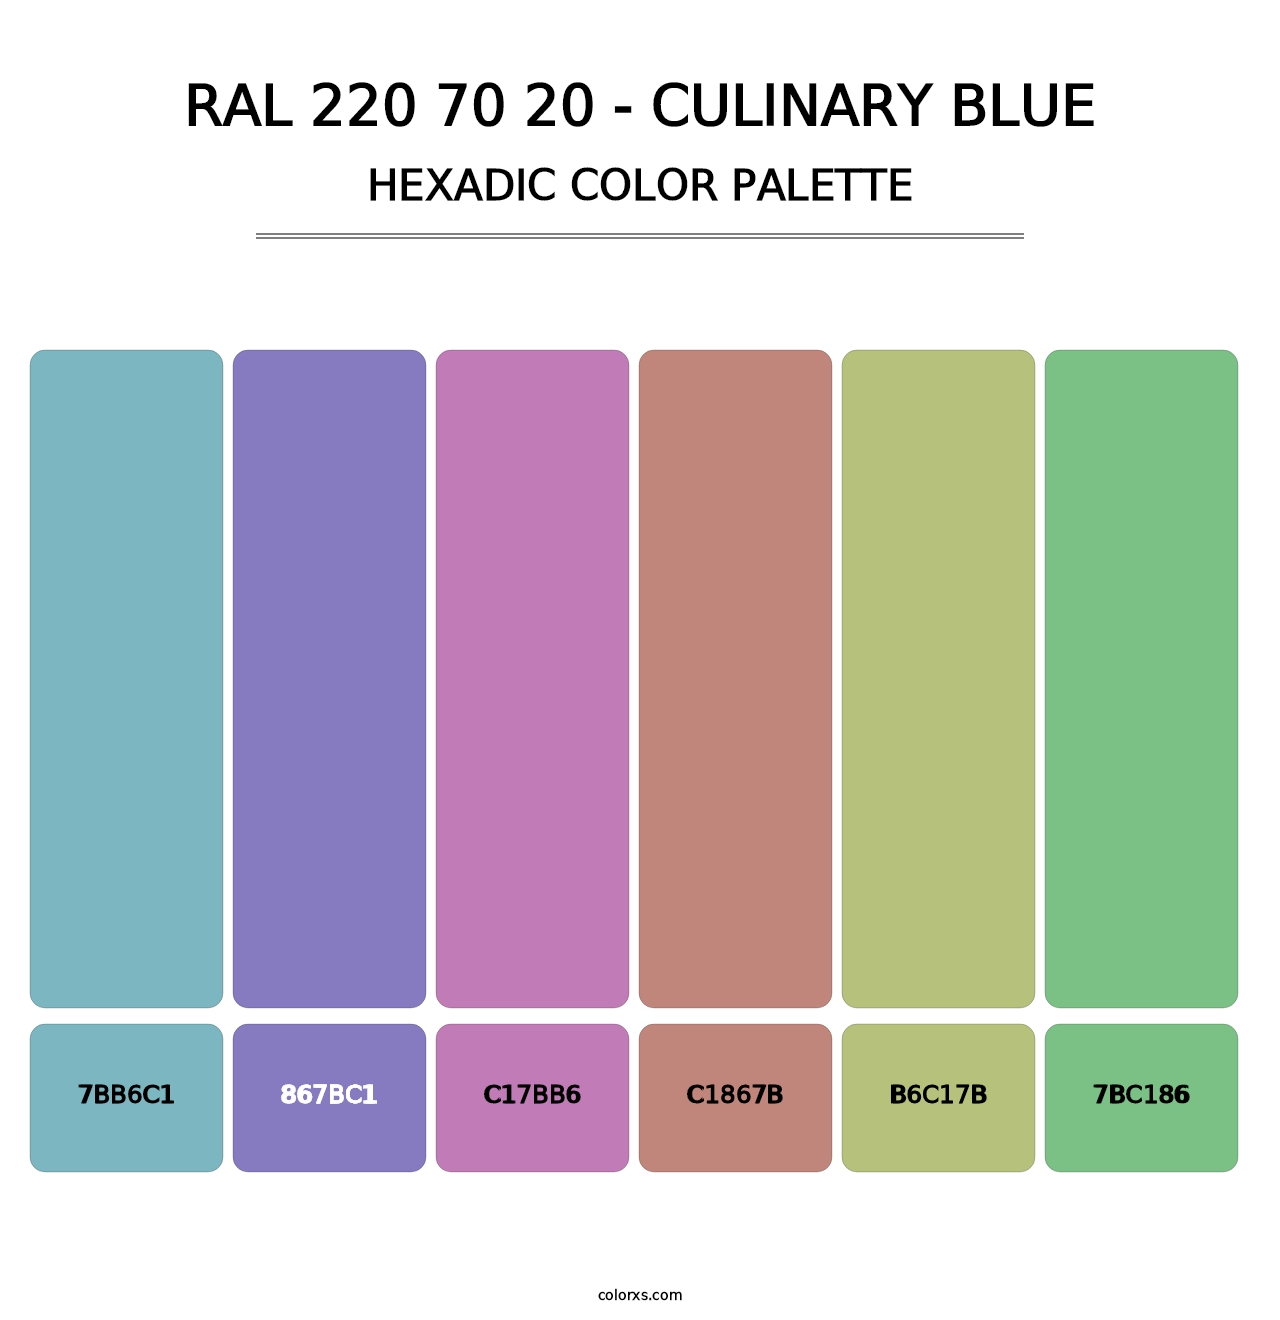 RAL 220 70 20 - Culinary Blue - Hexadic Color Palette